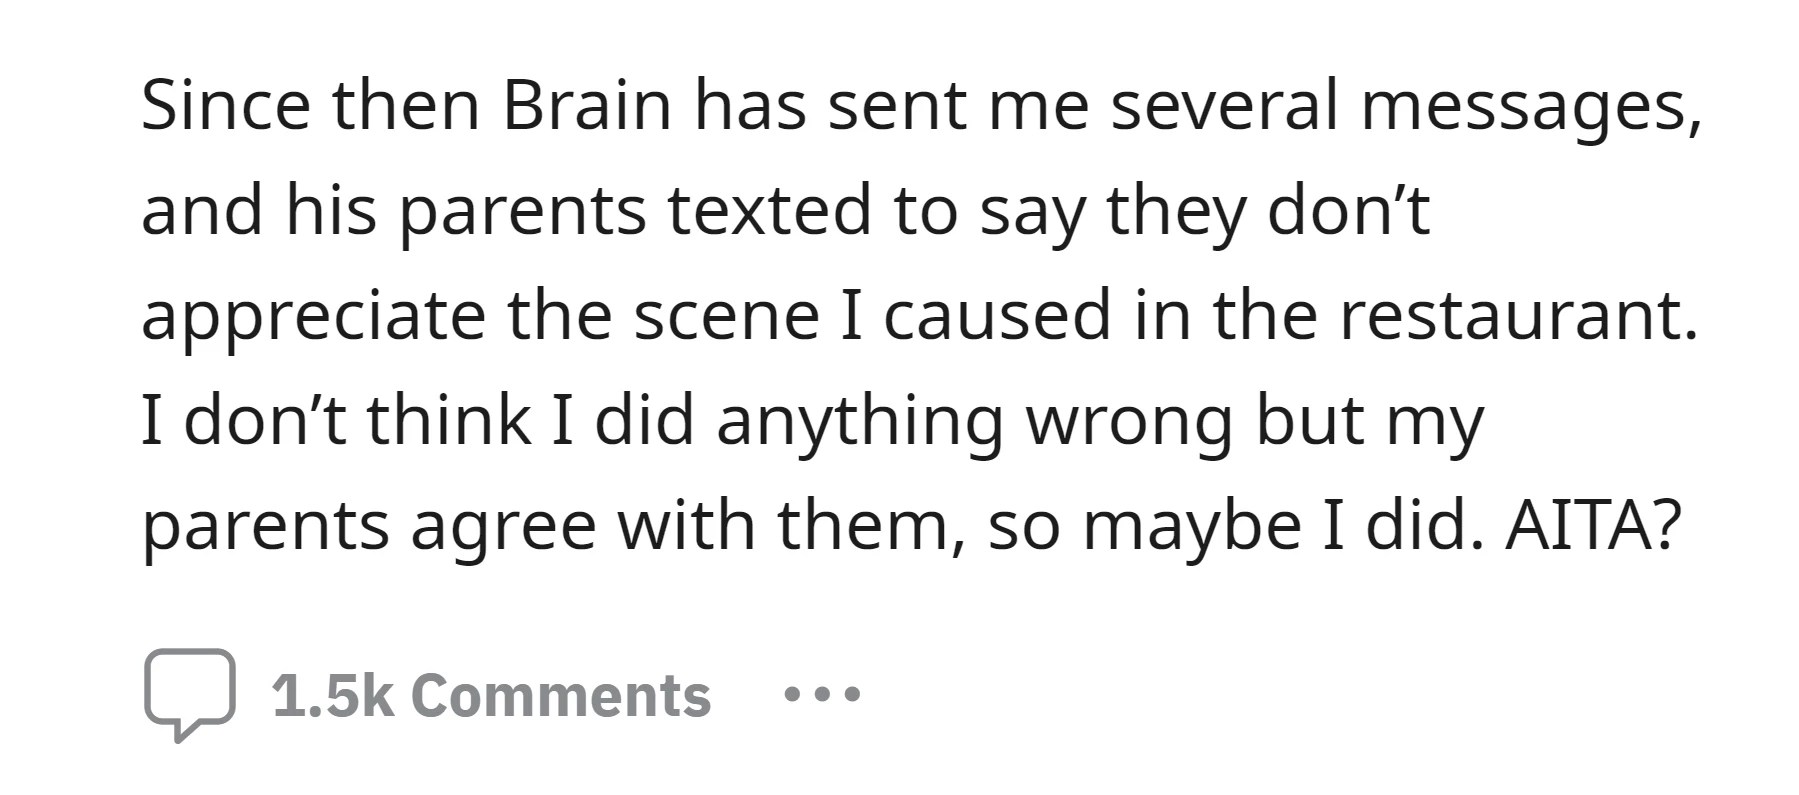 Brian has messaged OP, and his parents expressed their displeasure with the scene she created